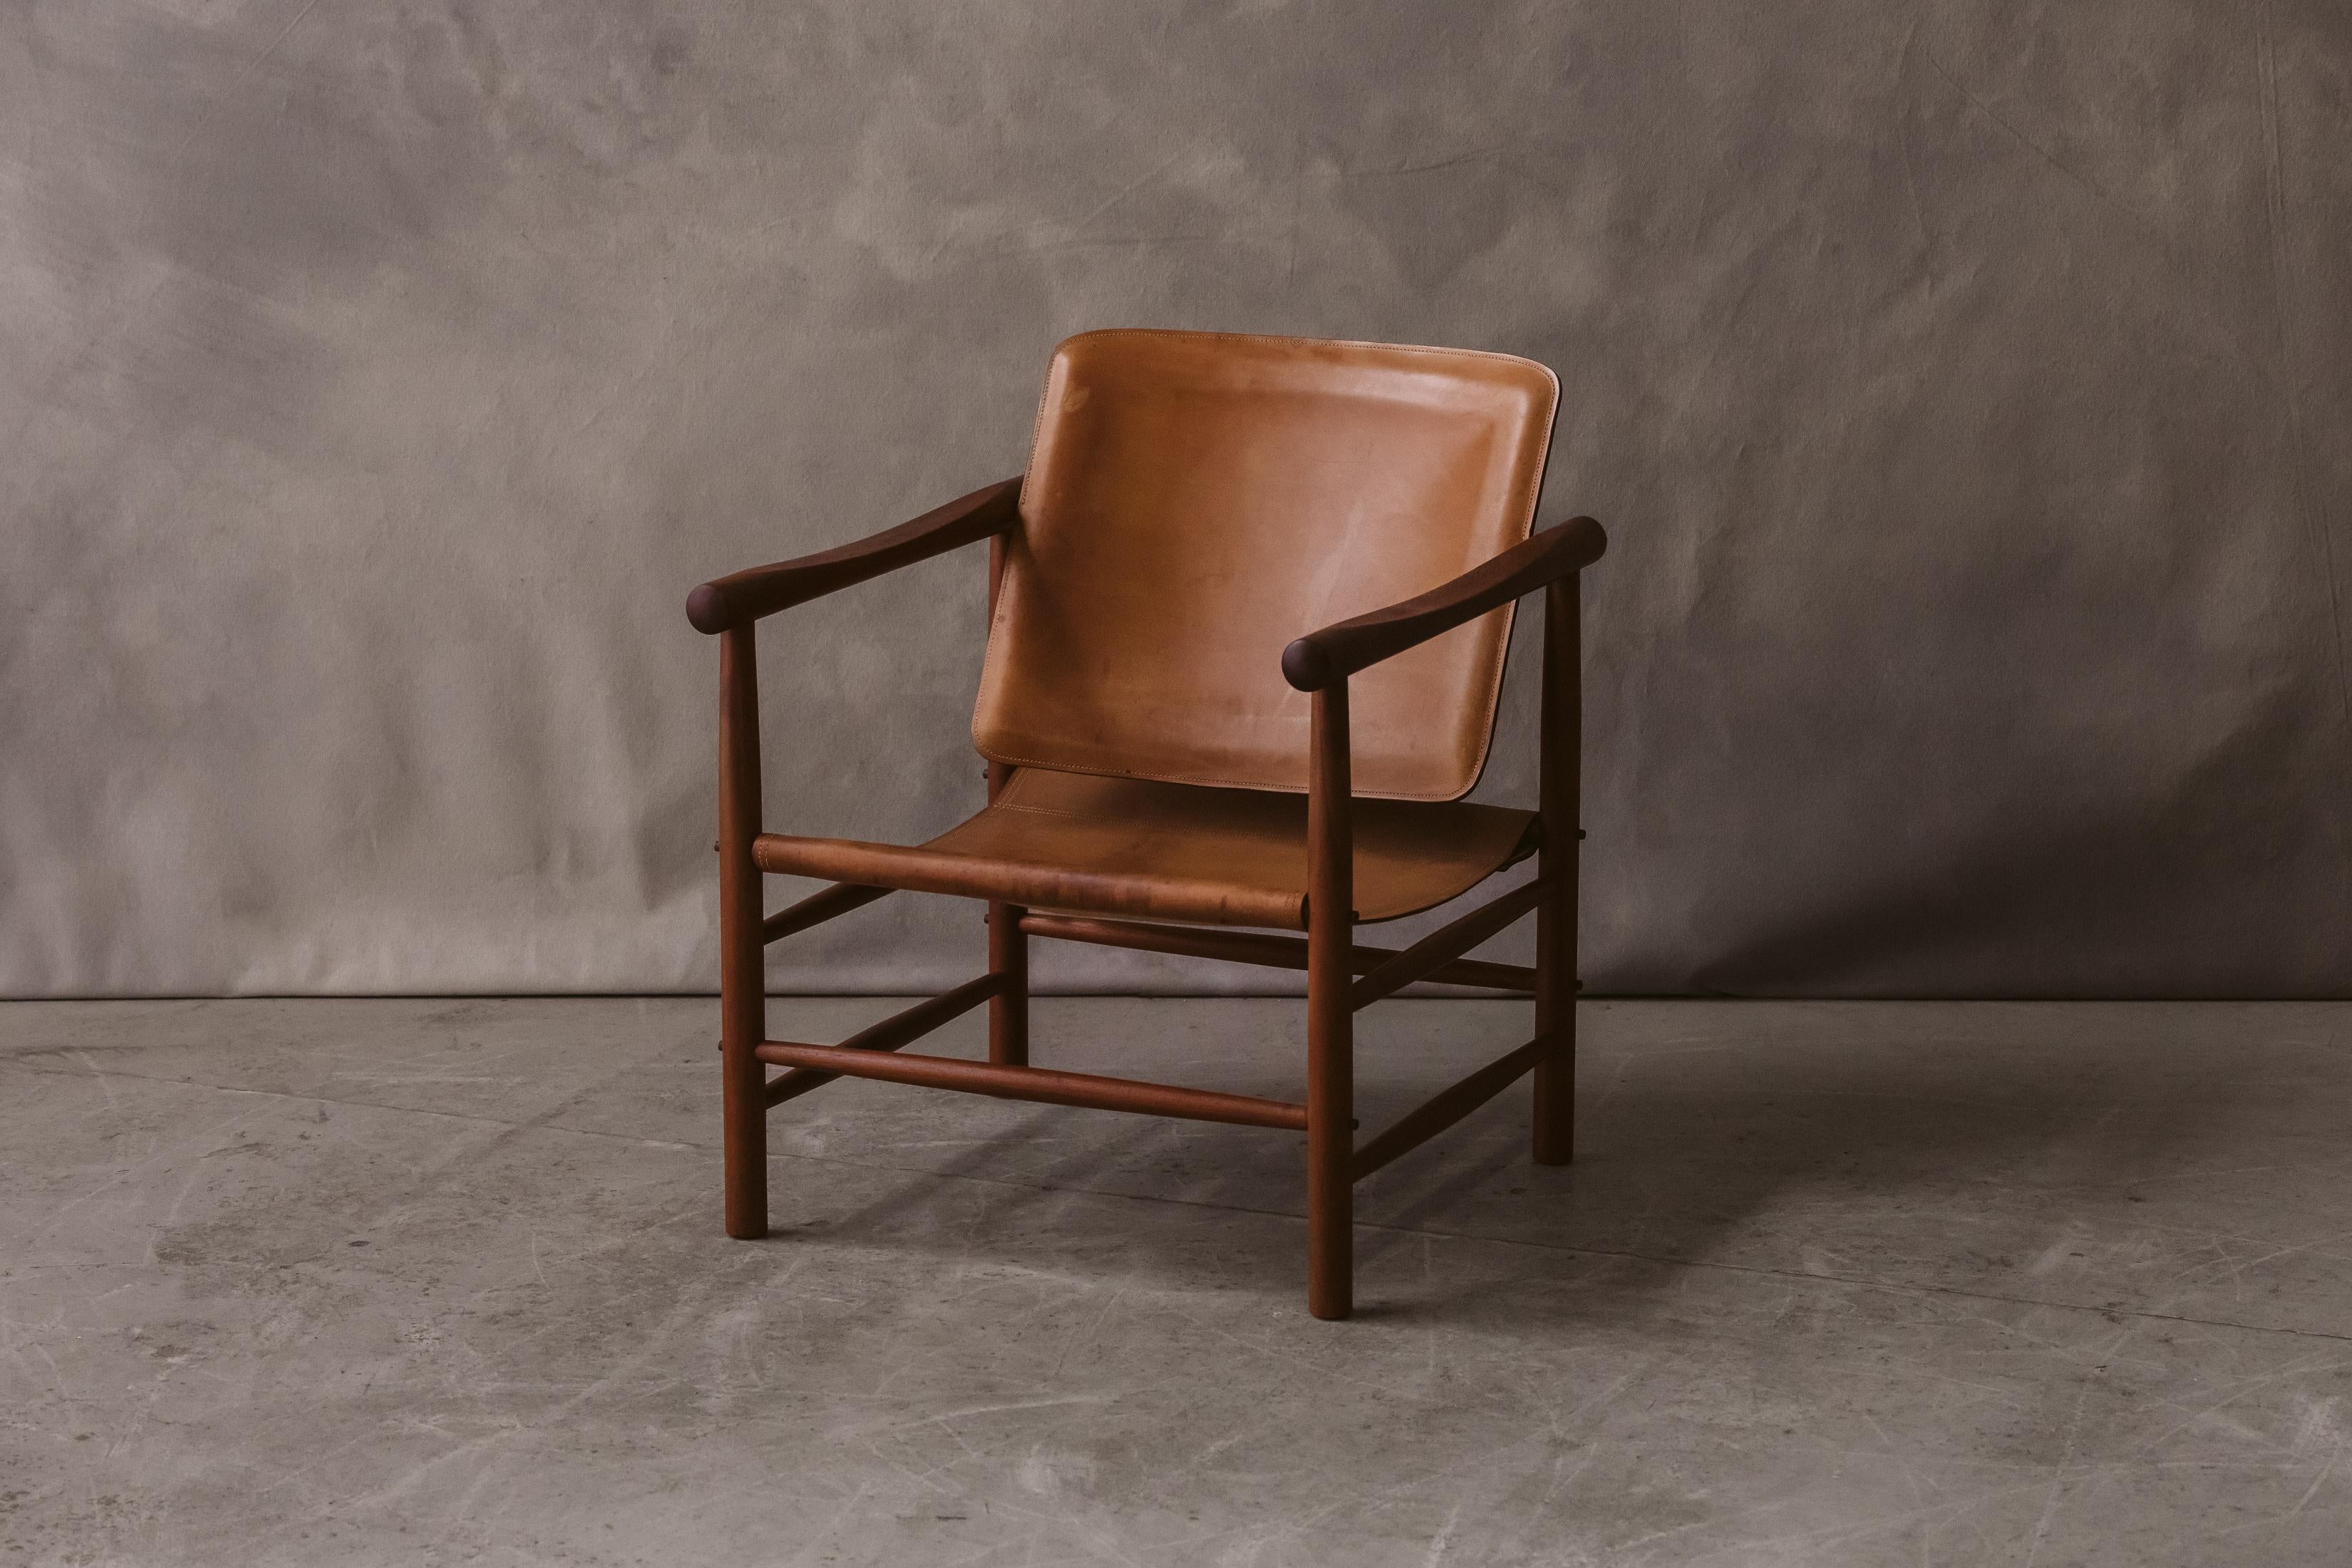 Vintage Kai Lyngfeldt Larsen Lounge chair from Denmark, Circa 1970. Solid oak and original cognac leather construction. 

We don't have the time to write an extensive description on each of our pieces. We prefer to speak directly with our clients. 